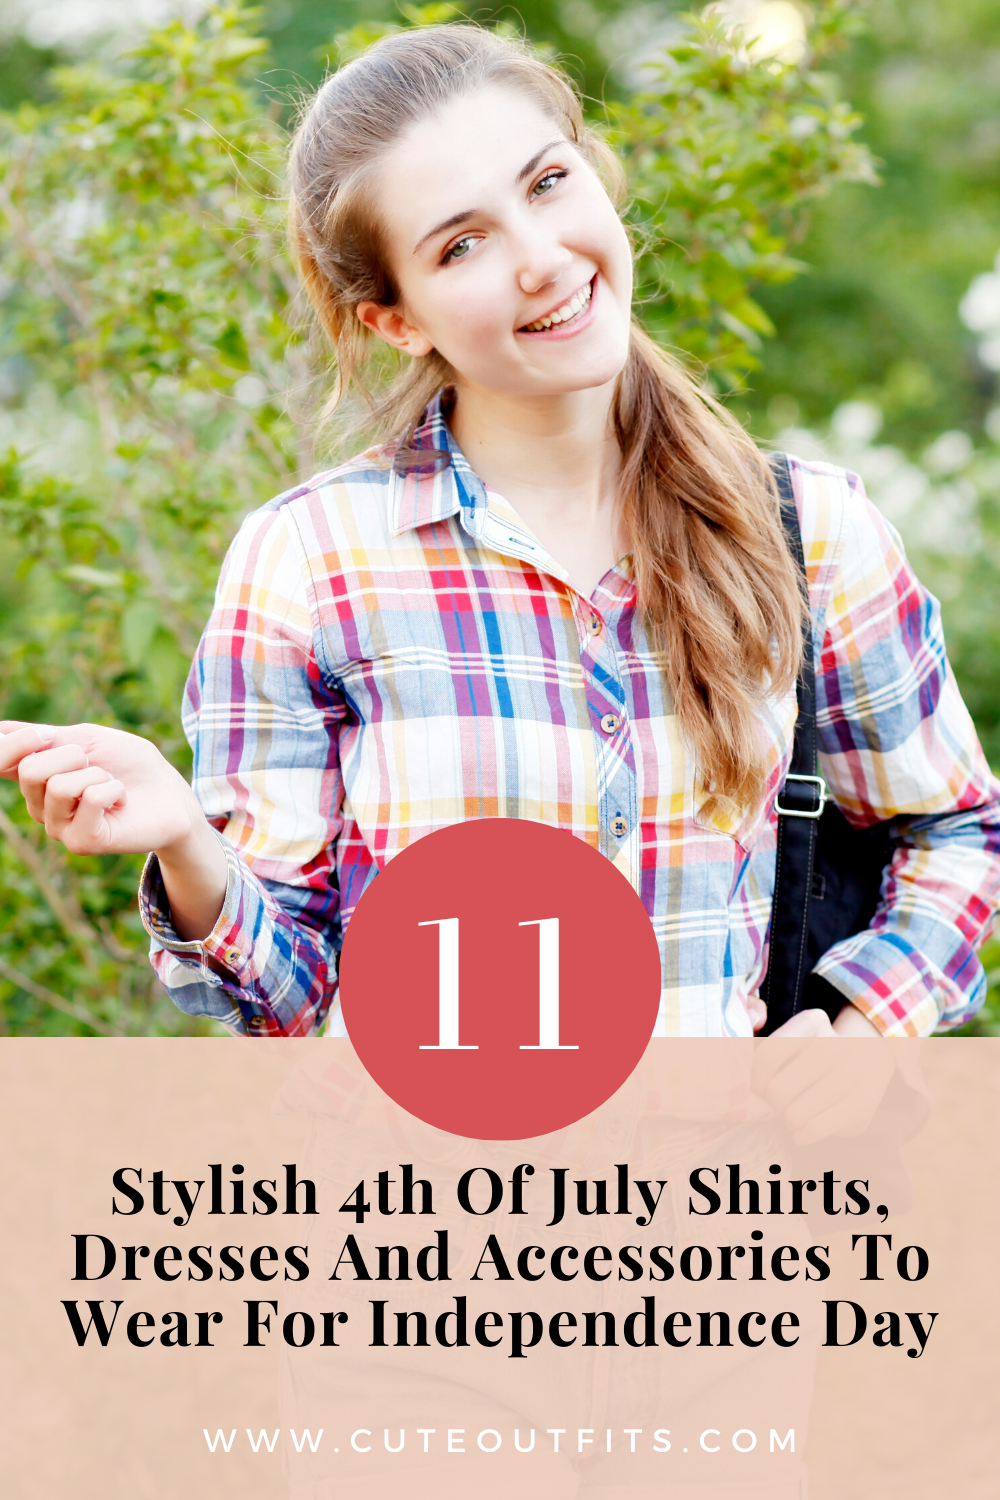 placard | 11 Stylish 4th Of July Shirts, Dresses And Accessories To Wear For Independence Day